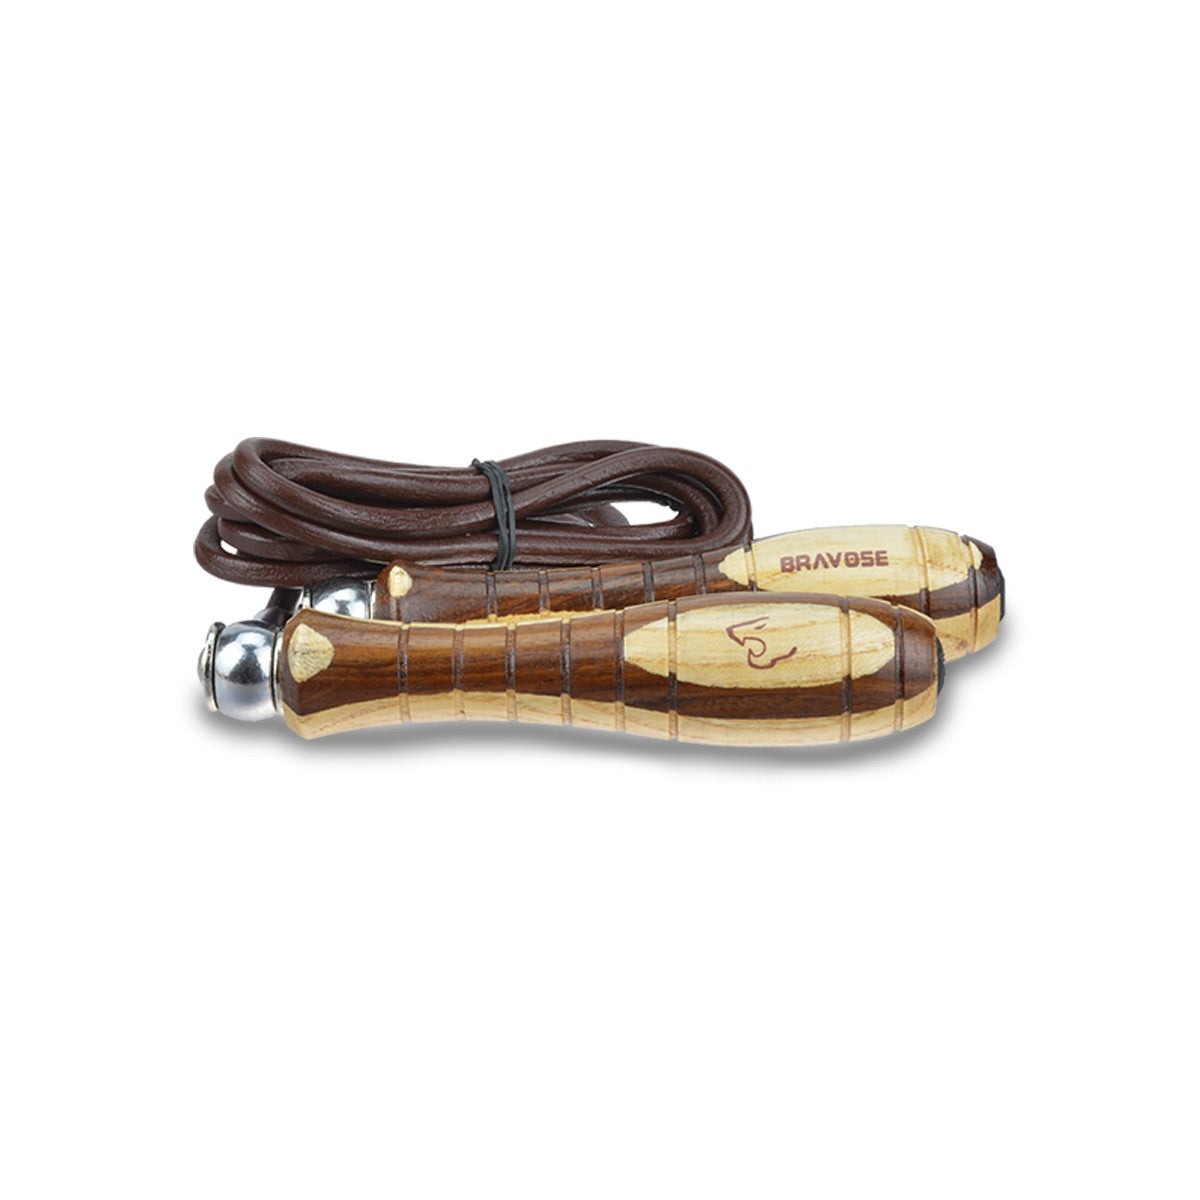 Valour Strike Leather Weighted Skipping Rope, Greece